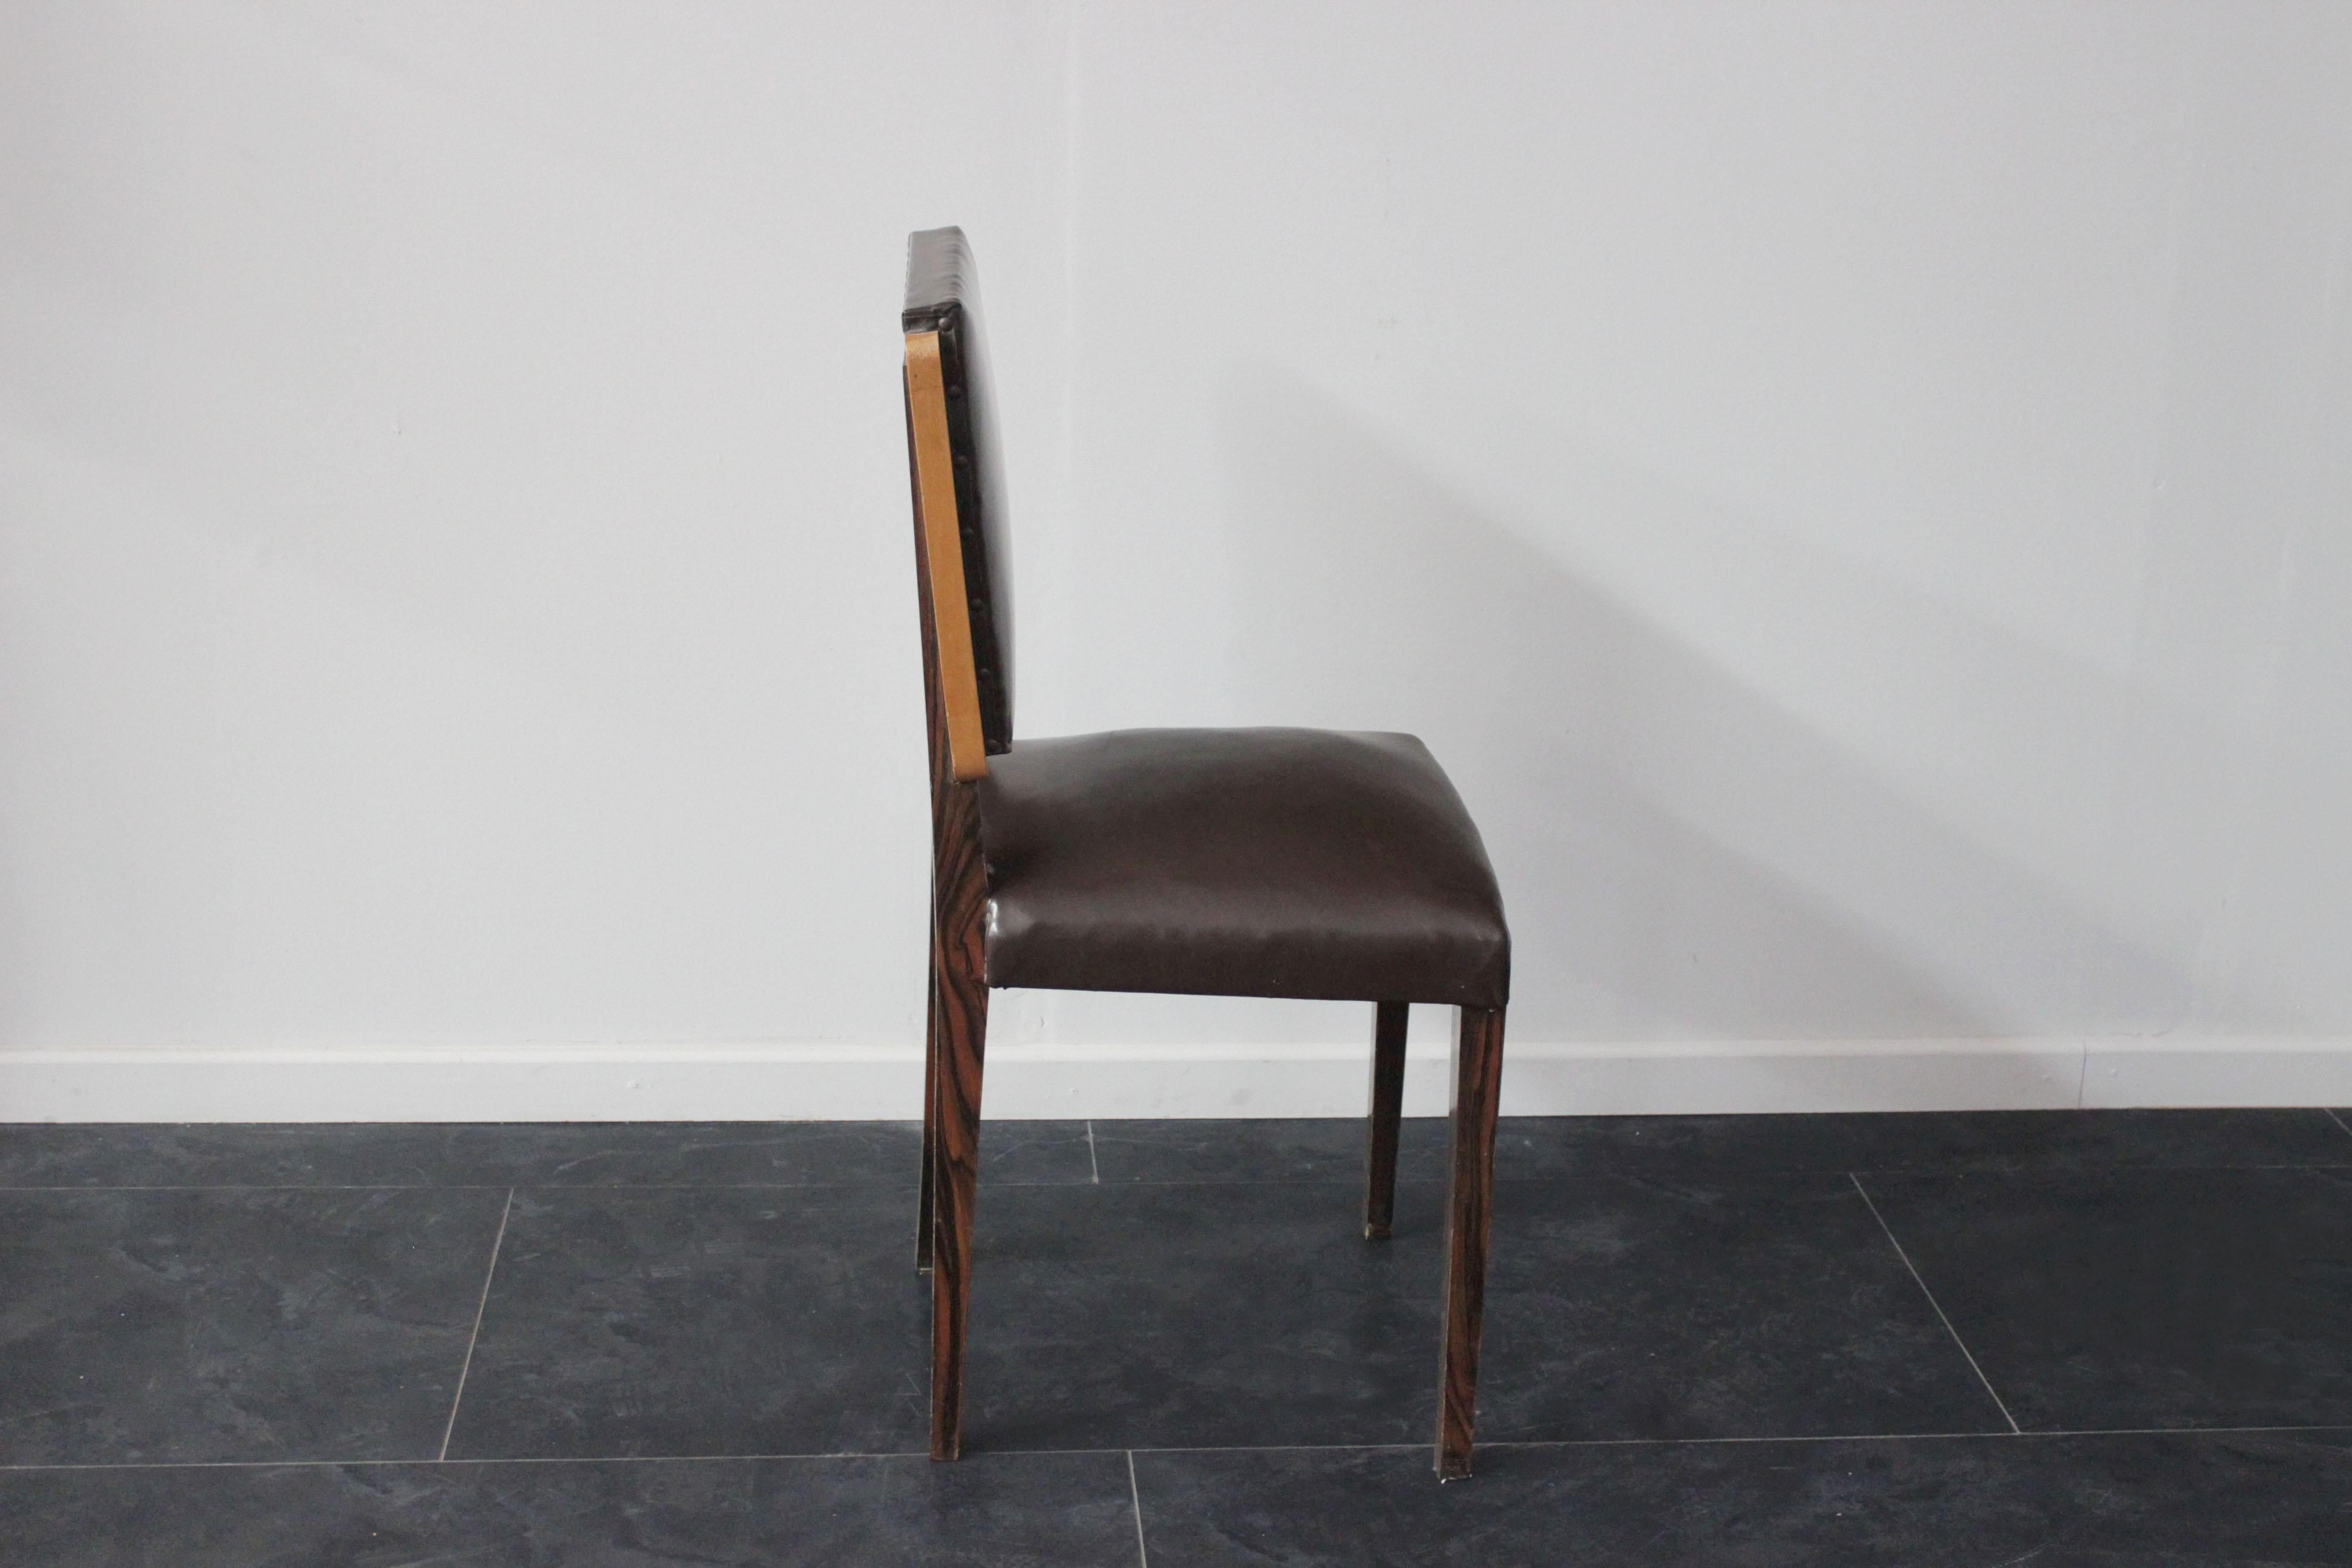 Macassar ebony and maple chair. Available 5 chairs, the price is for one chair.